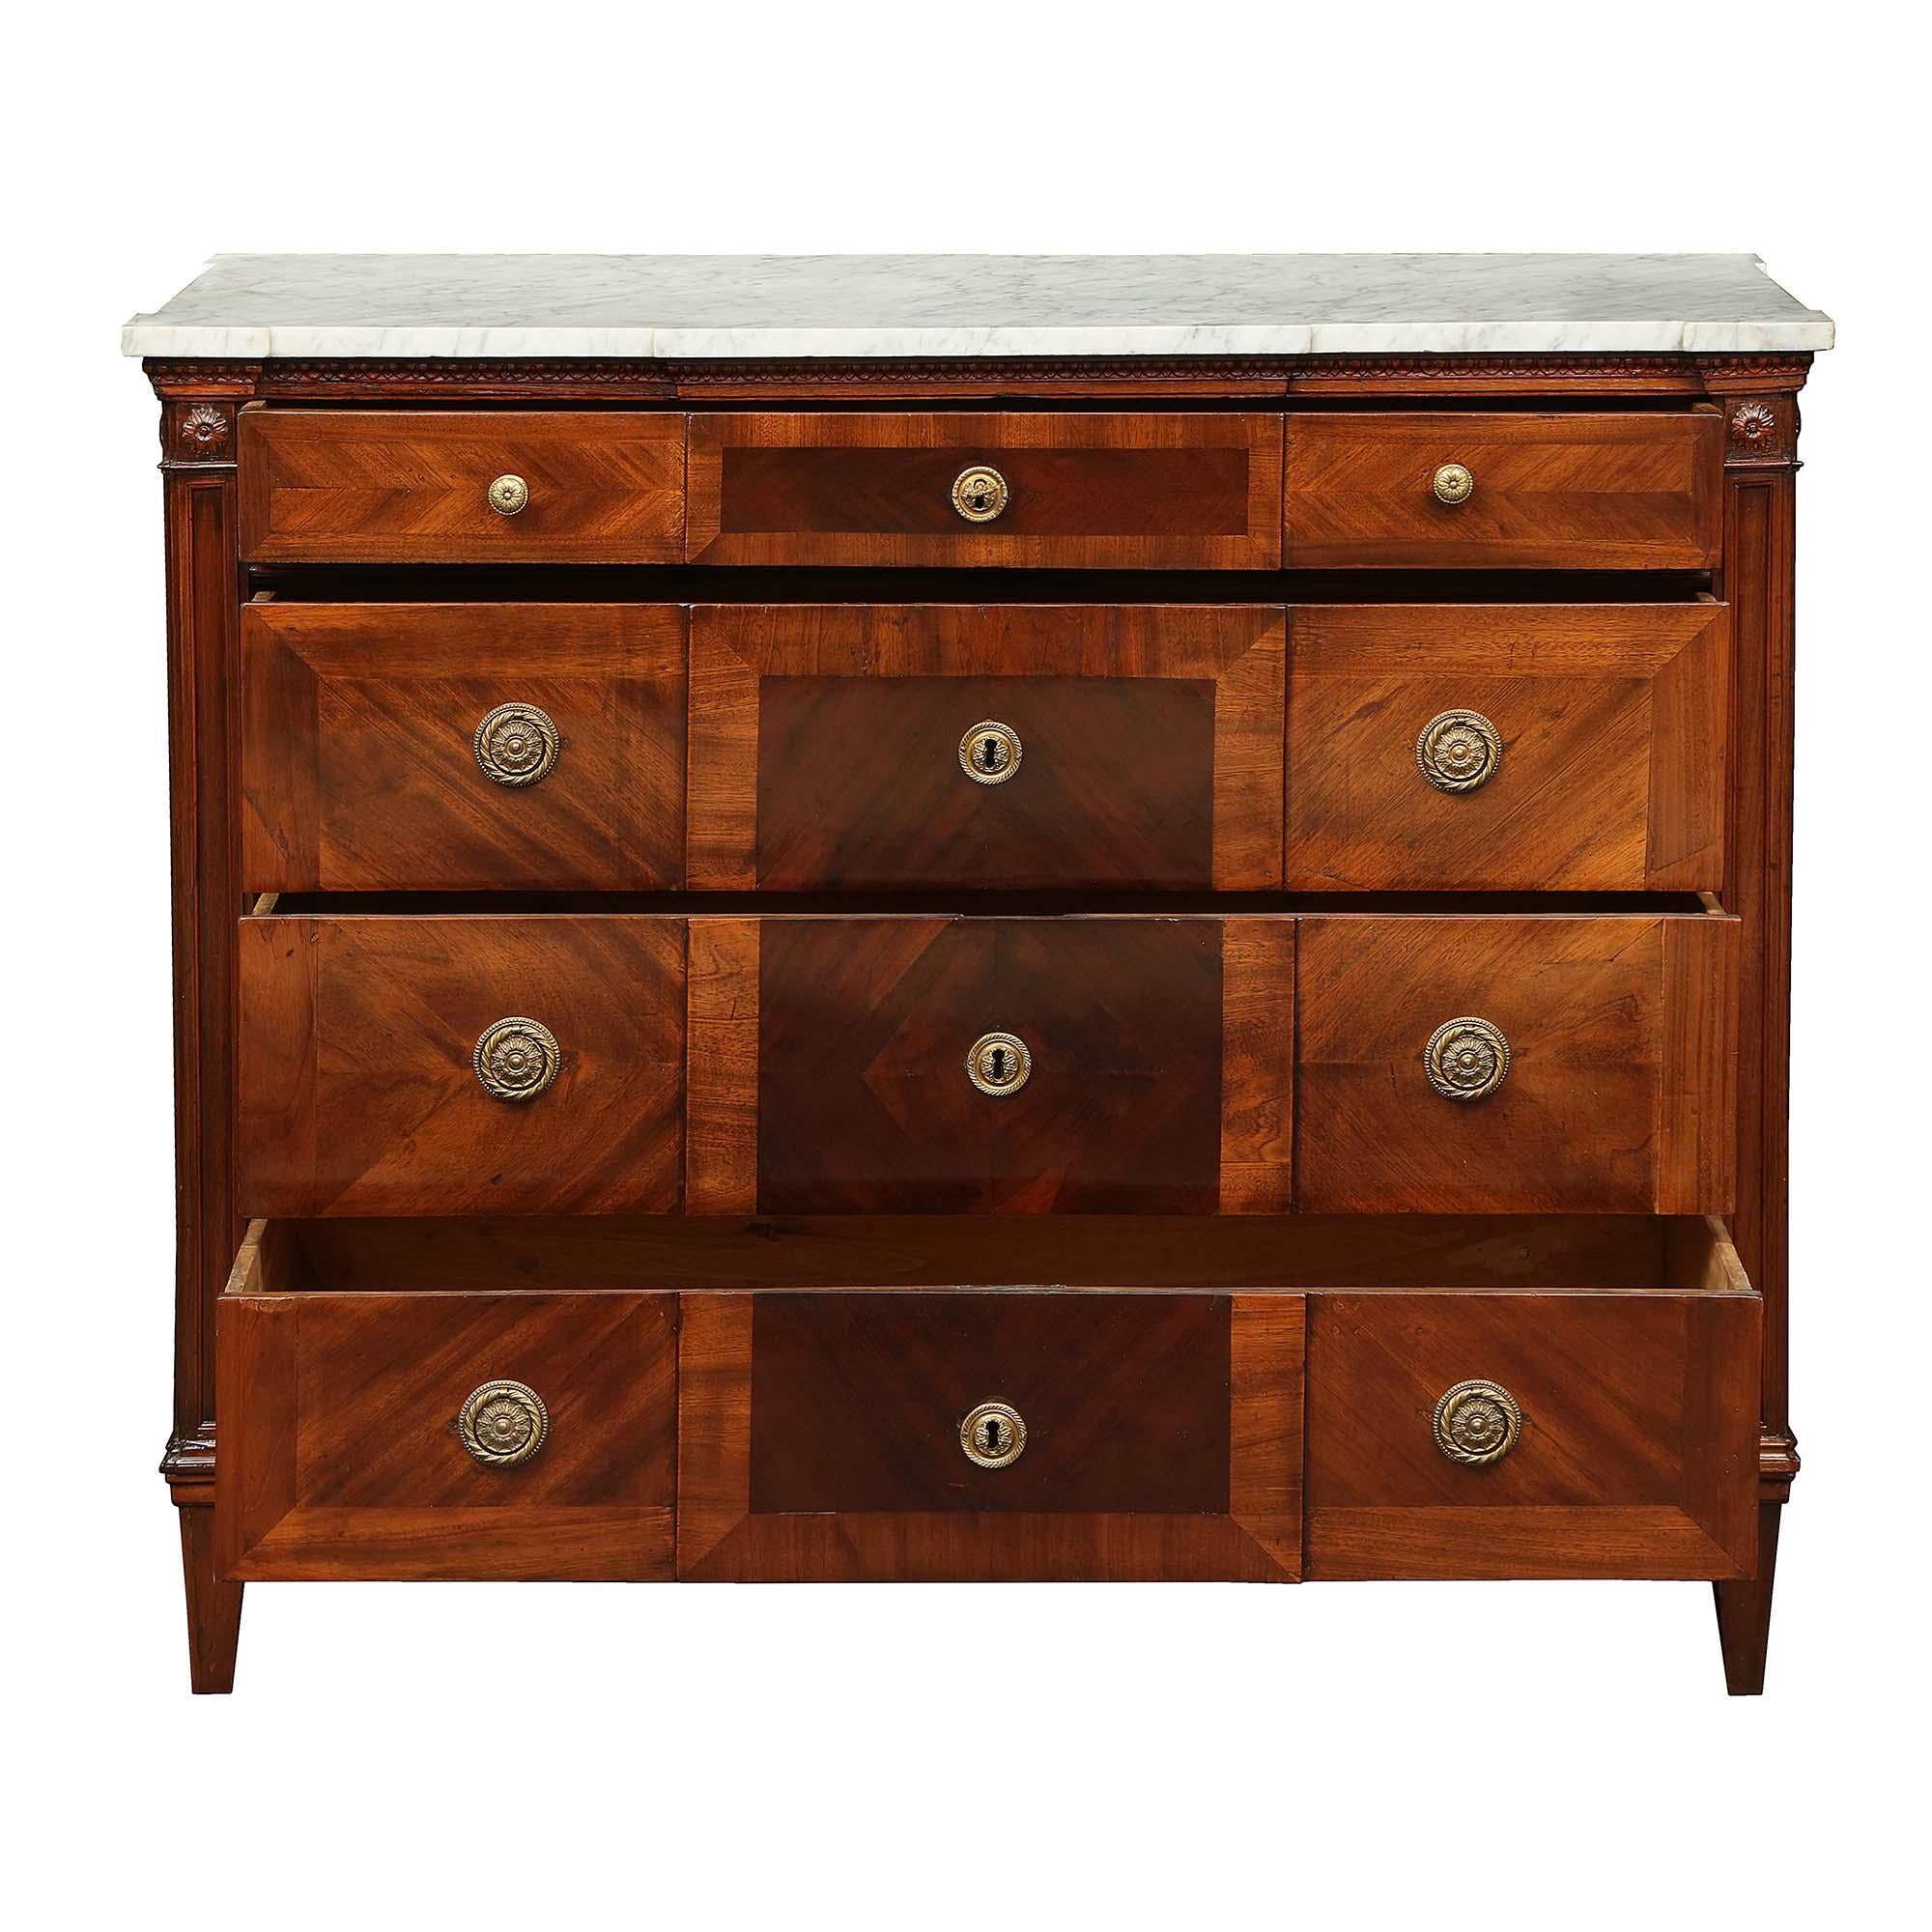 A handsome Italian 18th century Louis XVI period four drawer walnut chest. The chest is raised by square tapered legs below the straight frieze. At the center are three drawers, Sans Traverse, and one top drawer. Each drawer displays a dark walnut